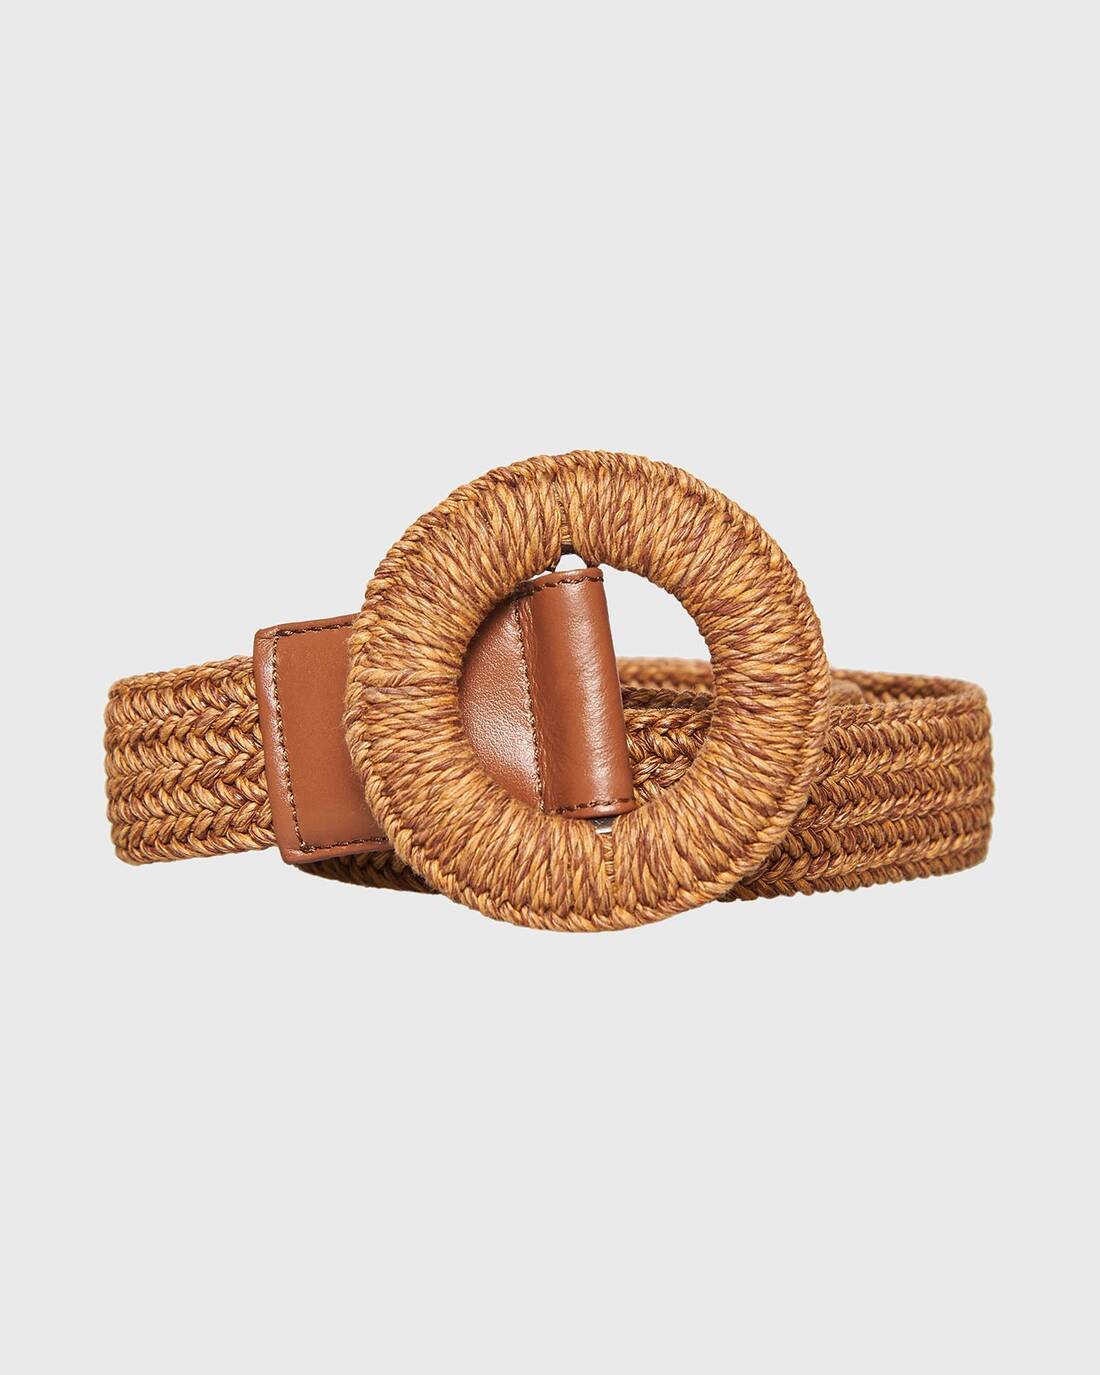 Woven belt with circular buckle